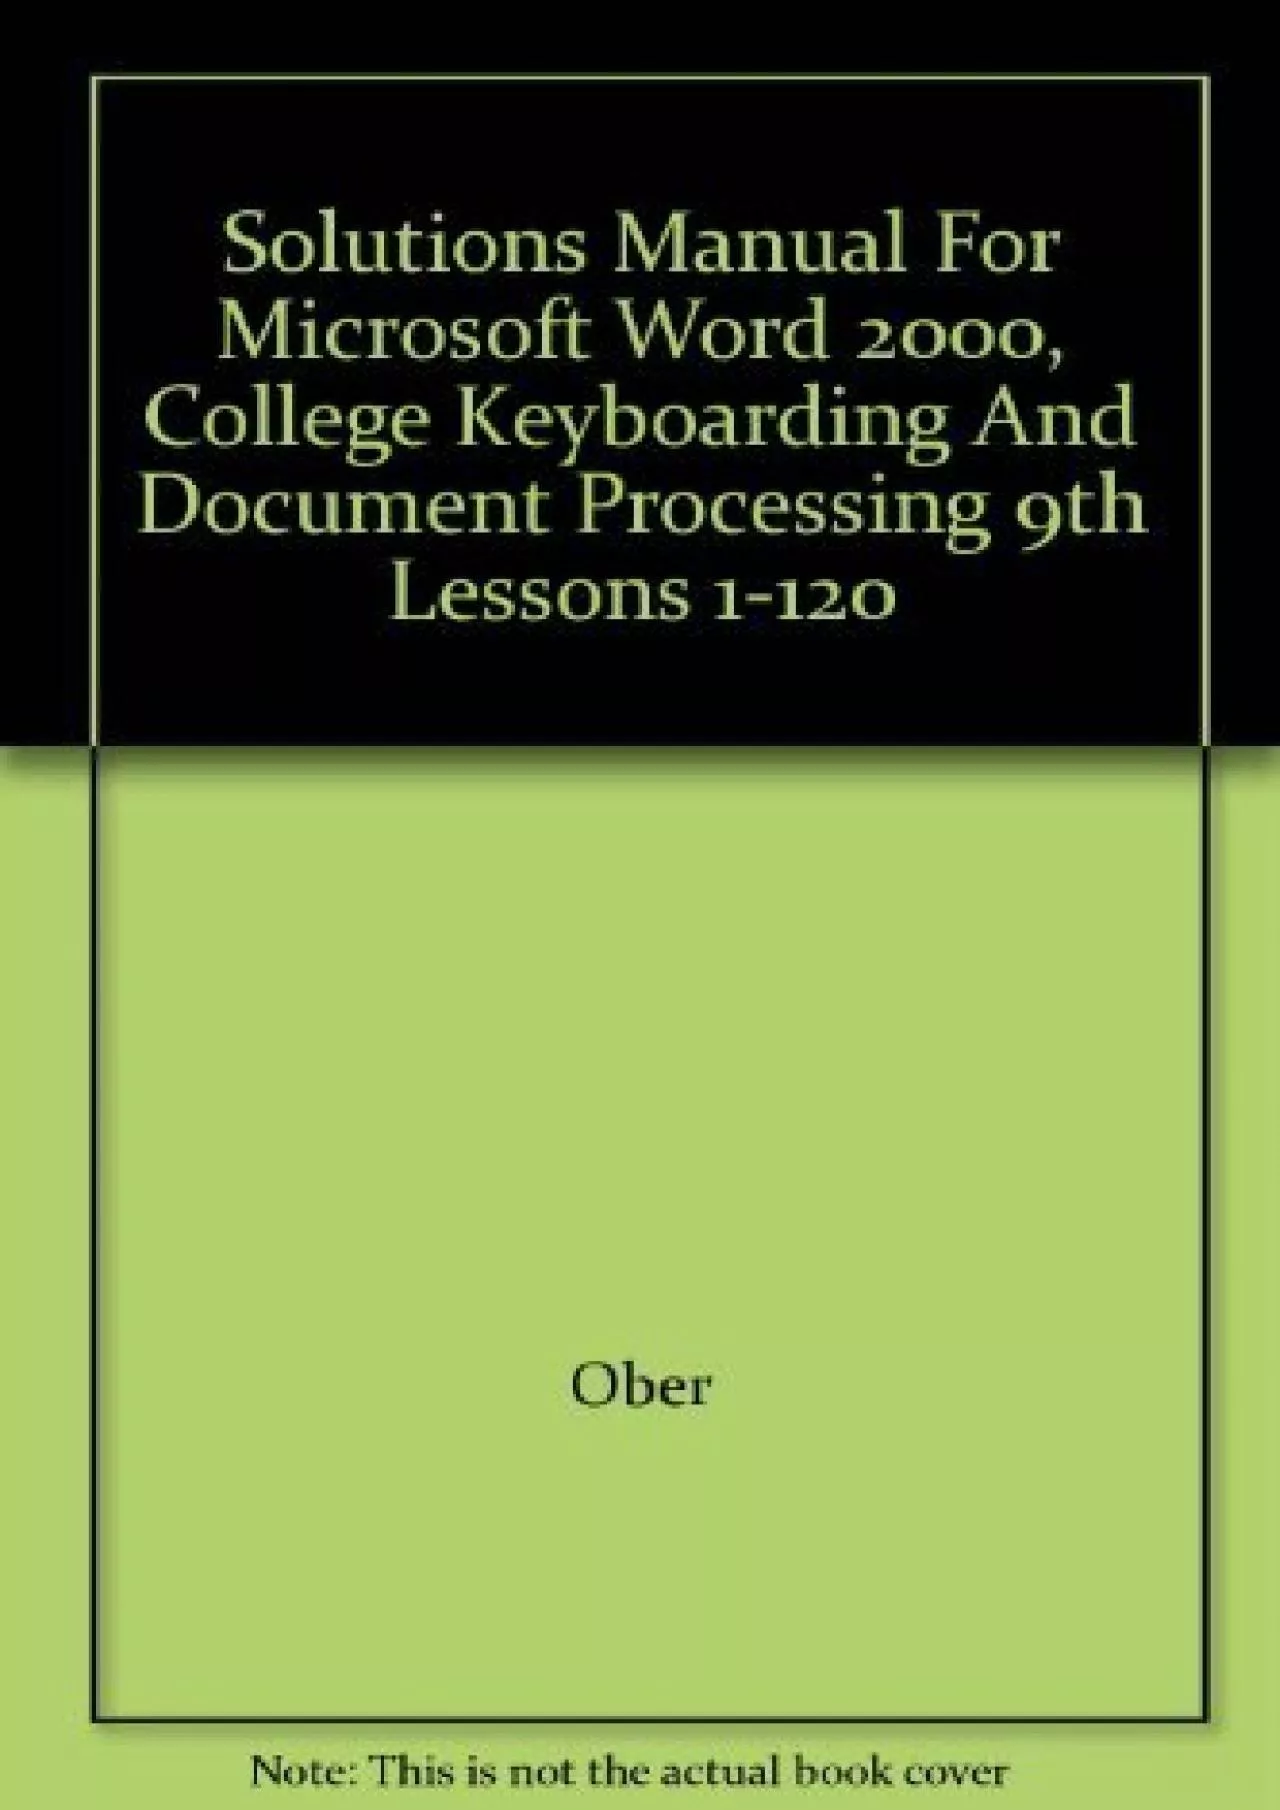 (EBOOK)-Solutions Manual For Microsoft Word 2000, College Keyboarding And Document Processing